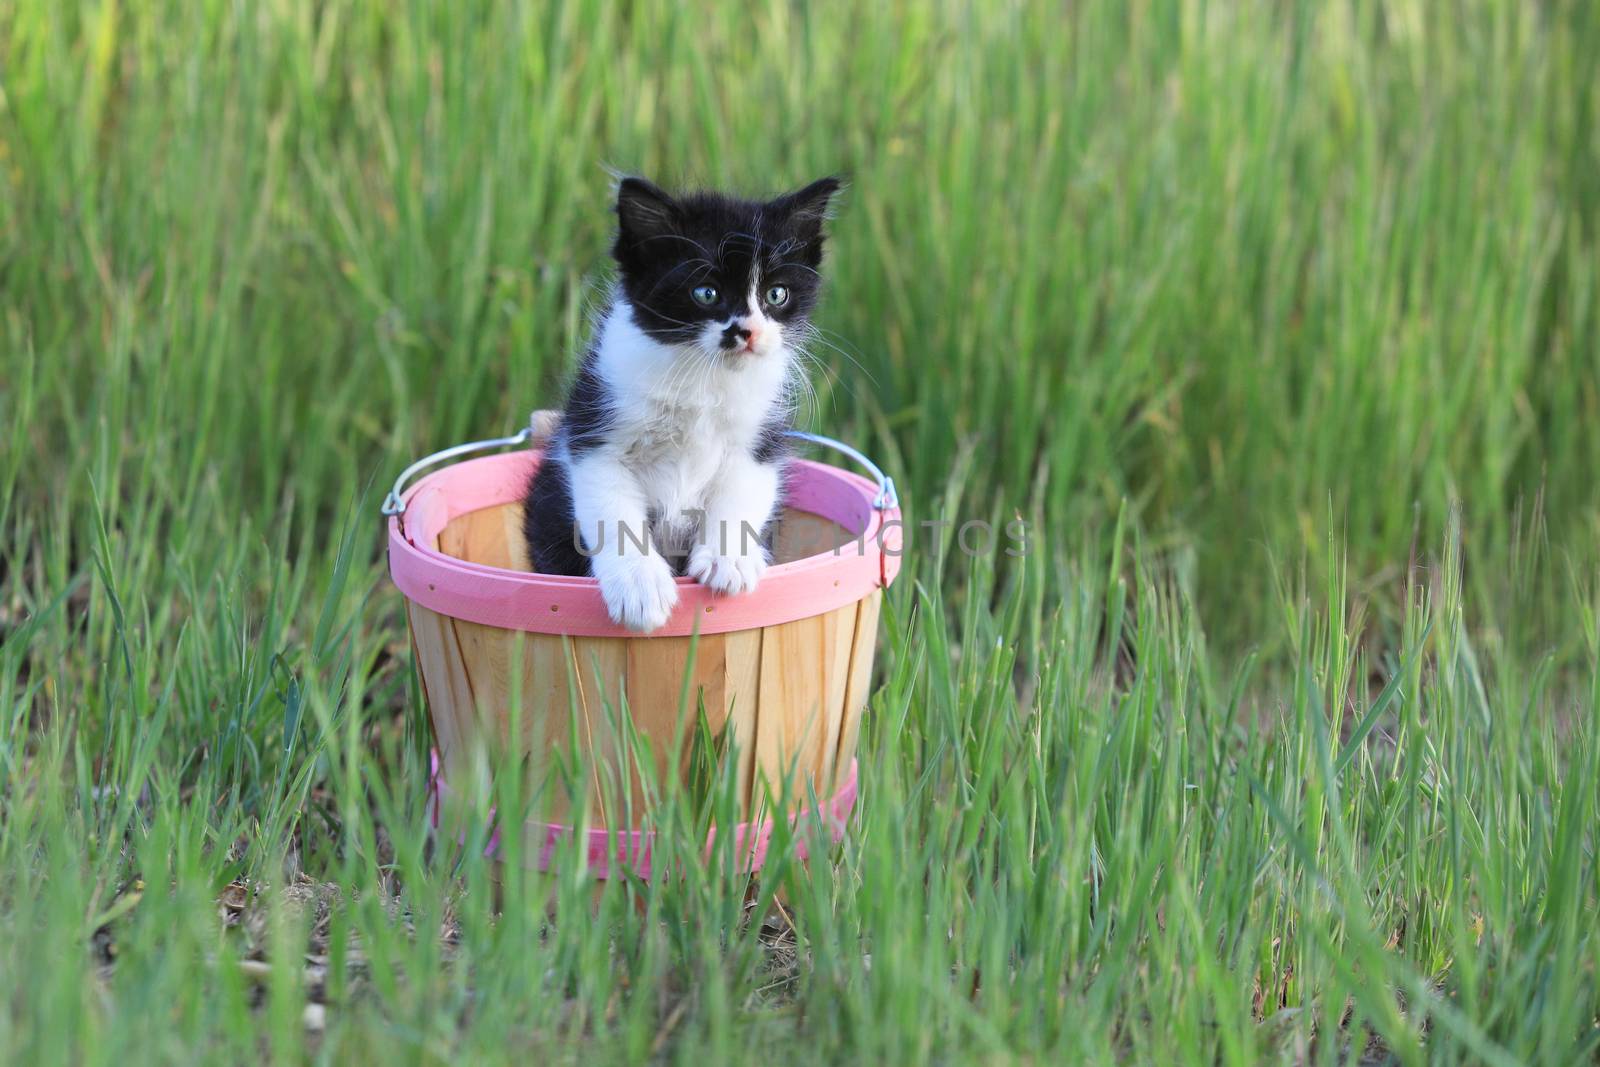 Adorable Kitten Outdoors in Green Tall Grass on a Sunny Day